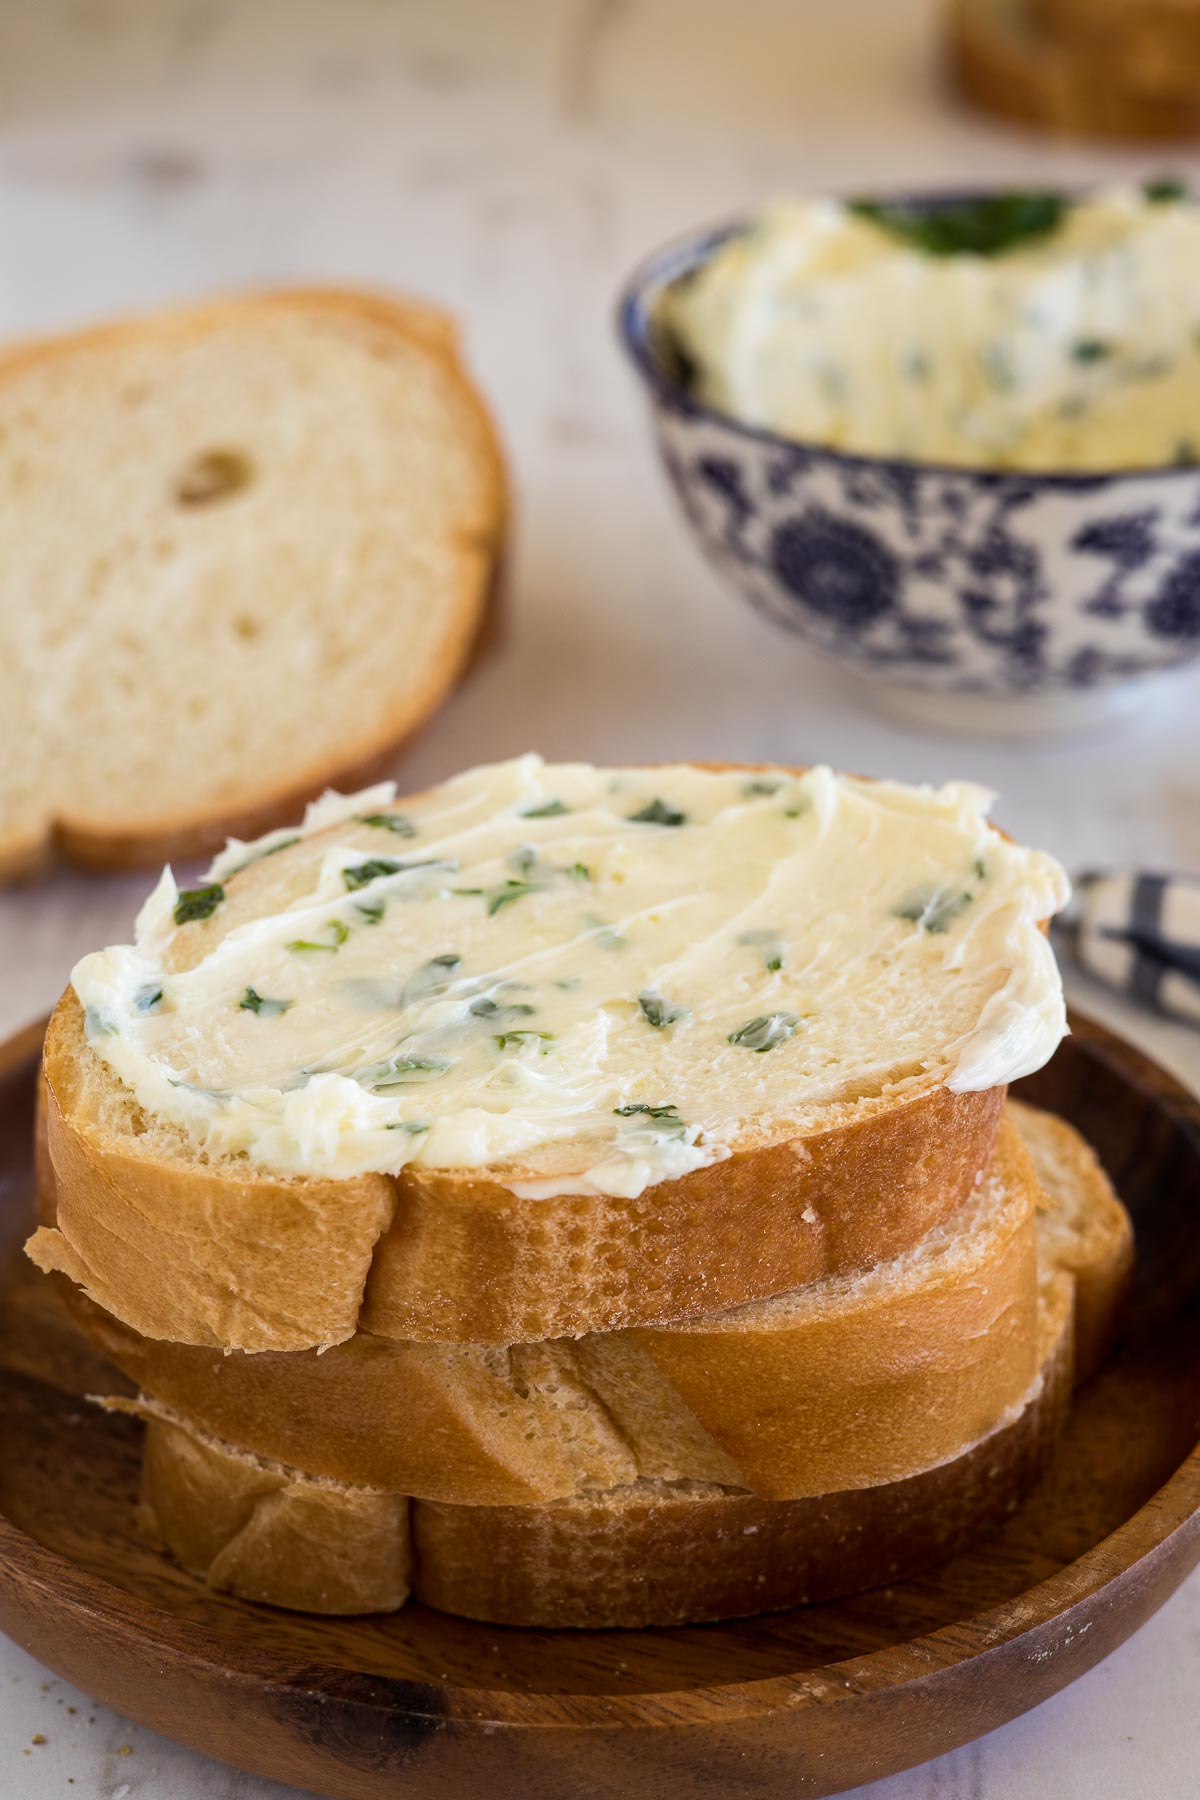 Bread with garlic herb butter on top.